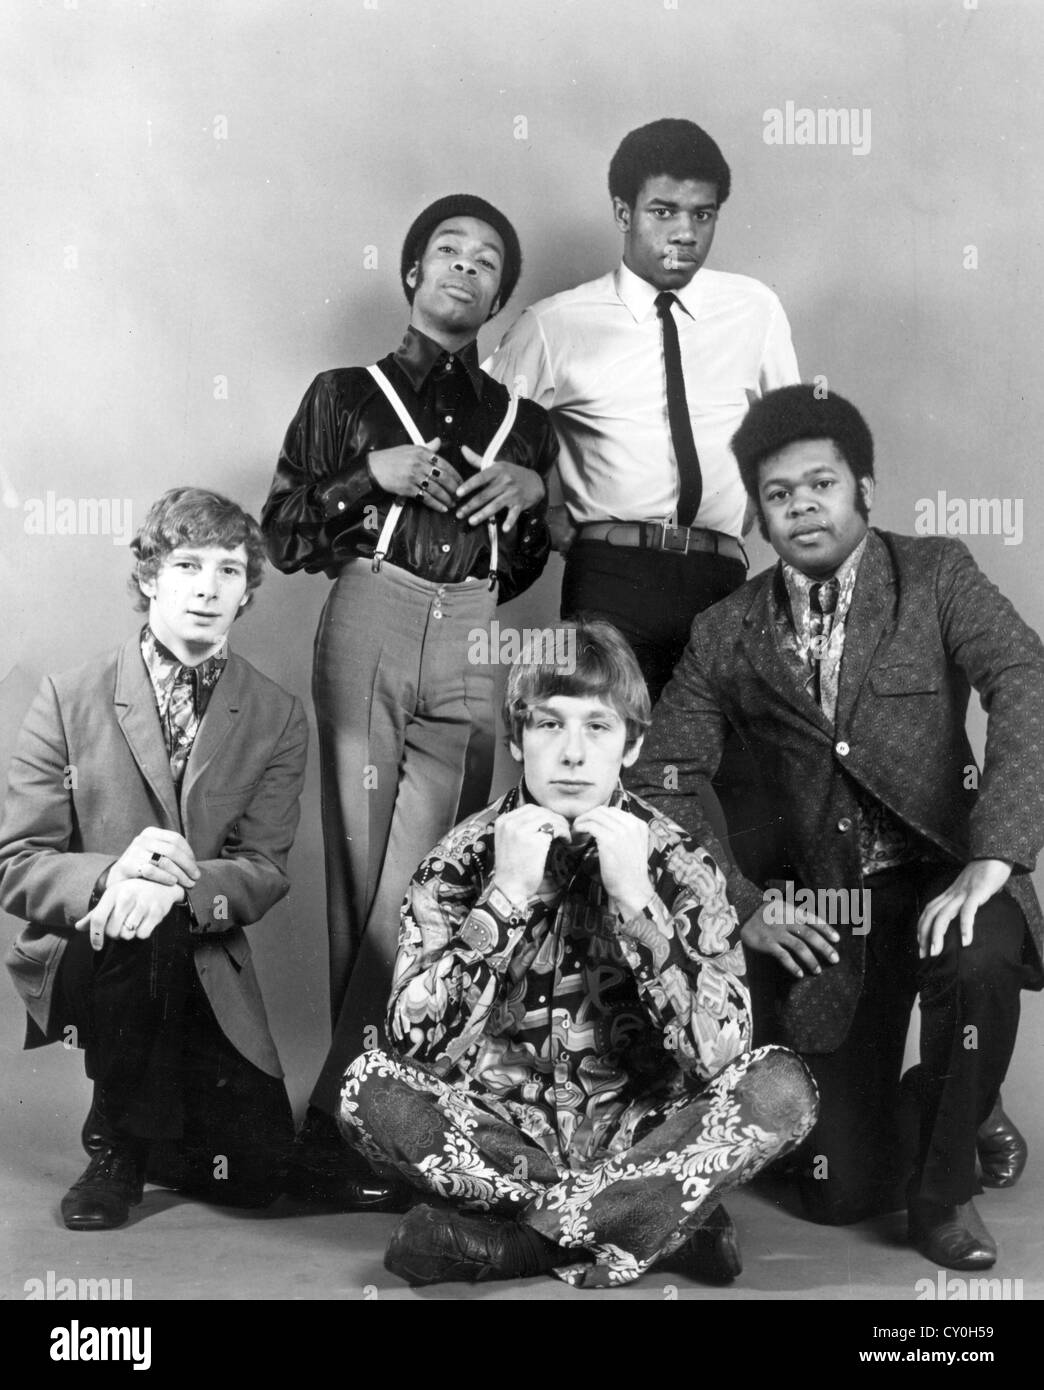 THE EQUALS Promotional photo of UK pop group in 1967. See Description below for names. Stock Photo